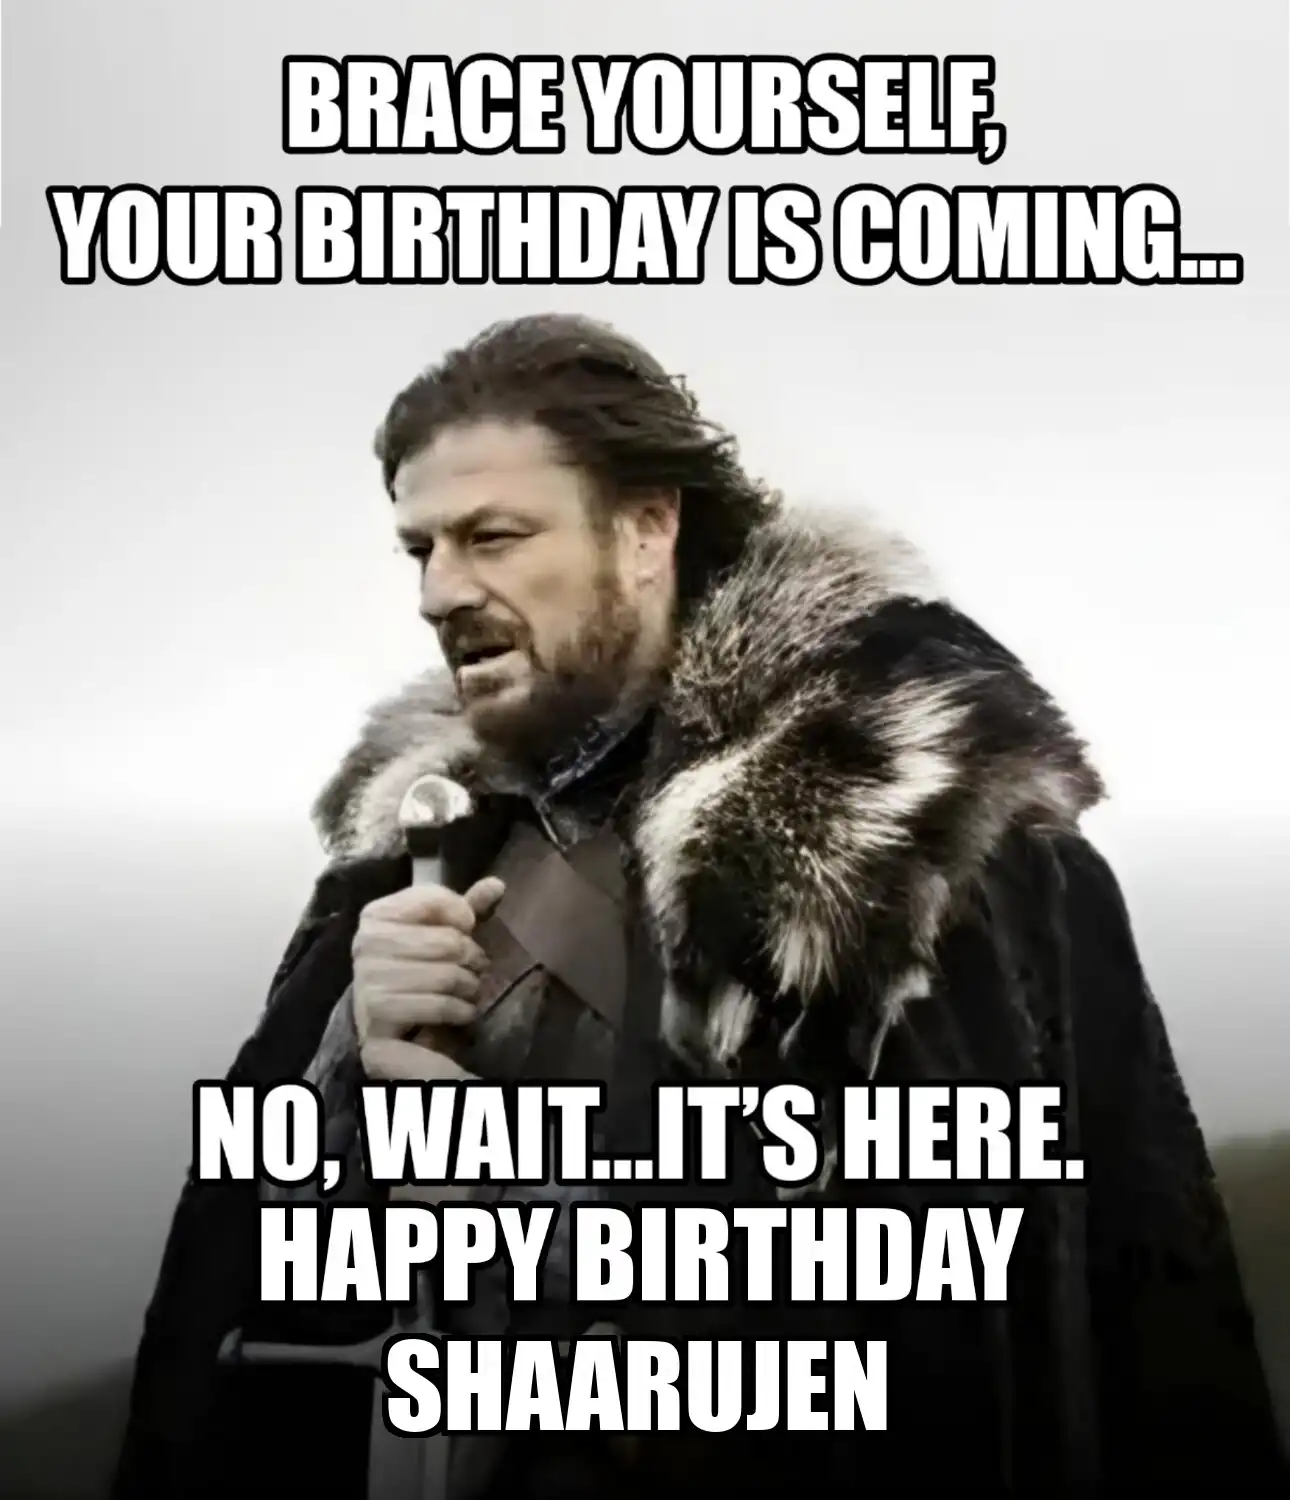 Happy Birthday Shaarujen Brace Yourself Your Birthday Is Coming Meme